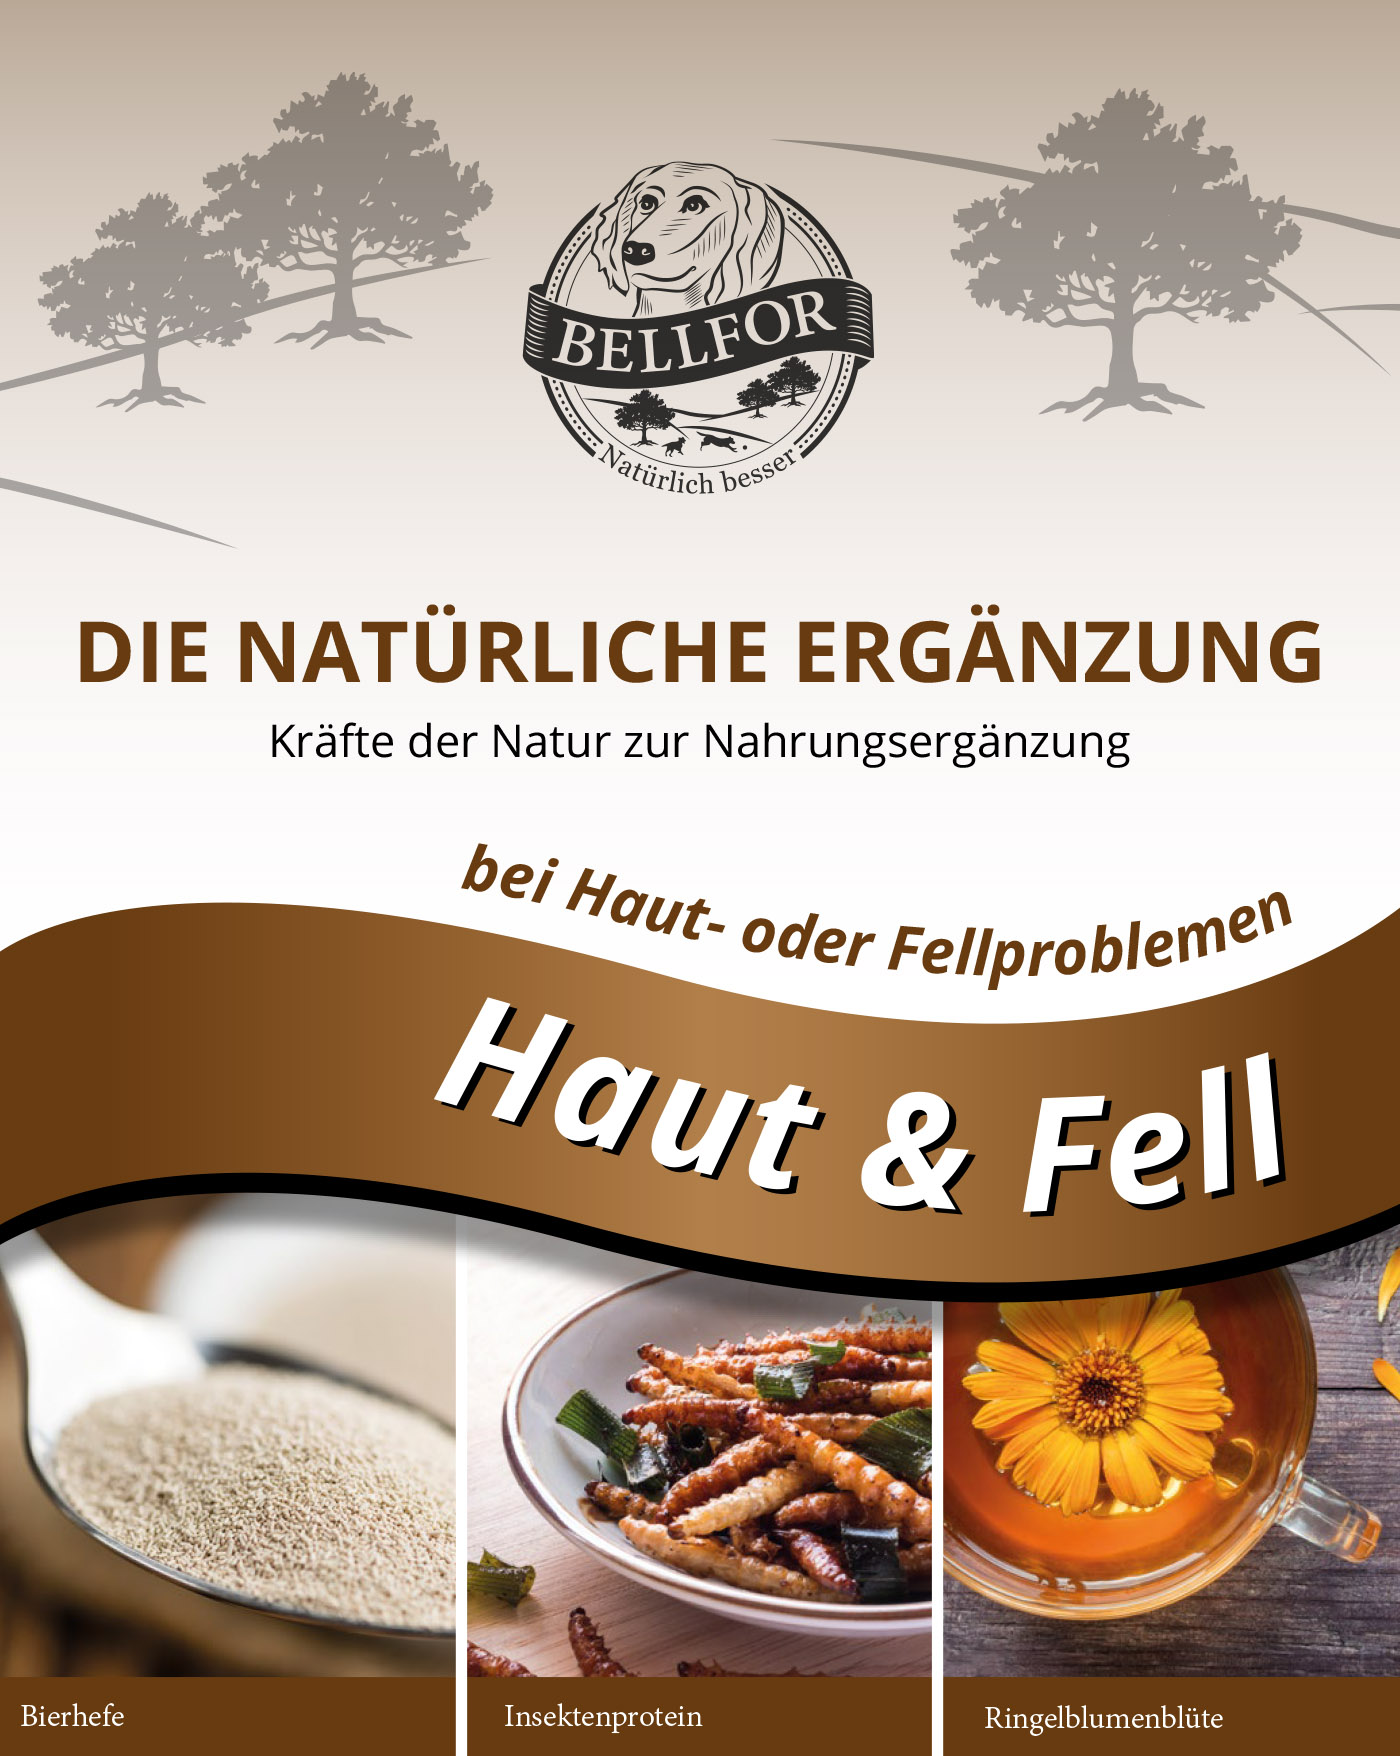 Bellfor "Haut & Fell"-Pulver, 250g-Dose